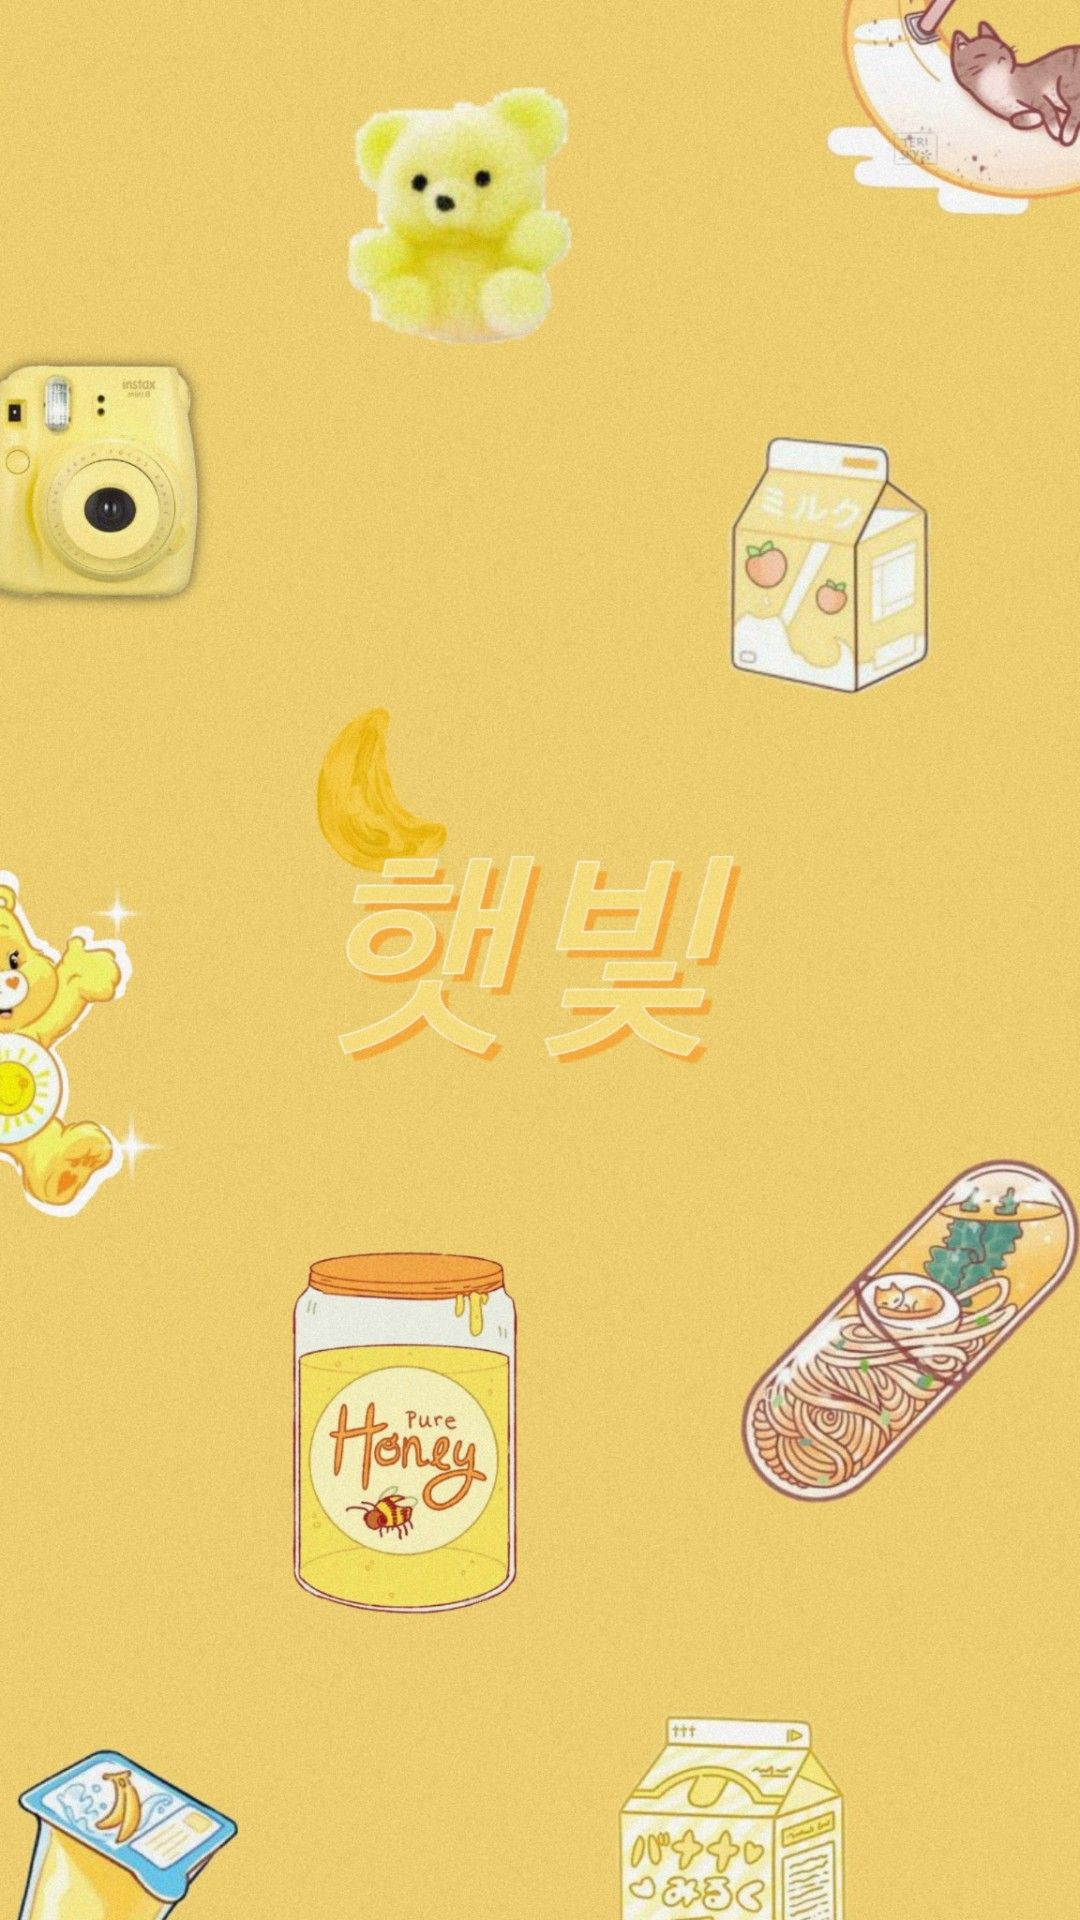 Yellow aesthetic wallpaper with different stickers such as a banana, honey, milk, camera, teddy bear, and a bowl of noodles - Cute